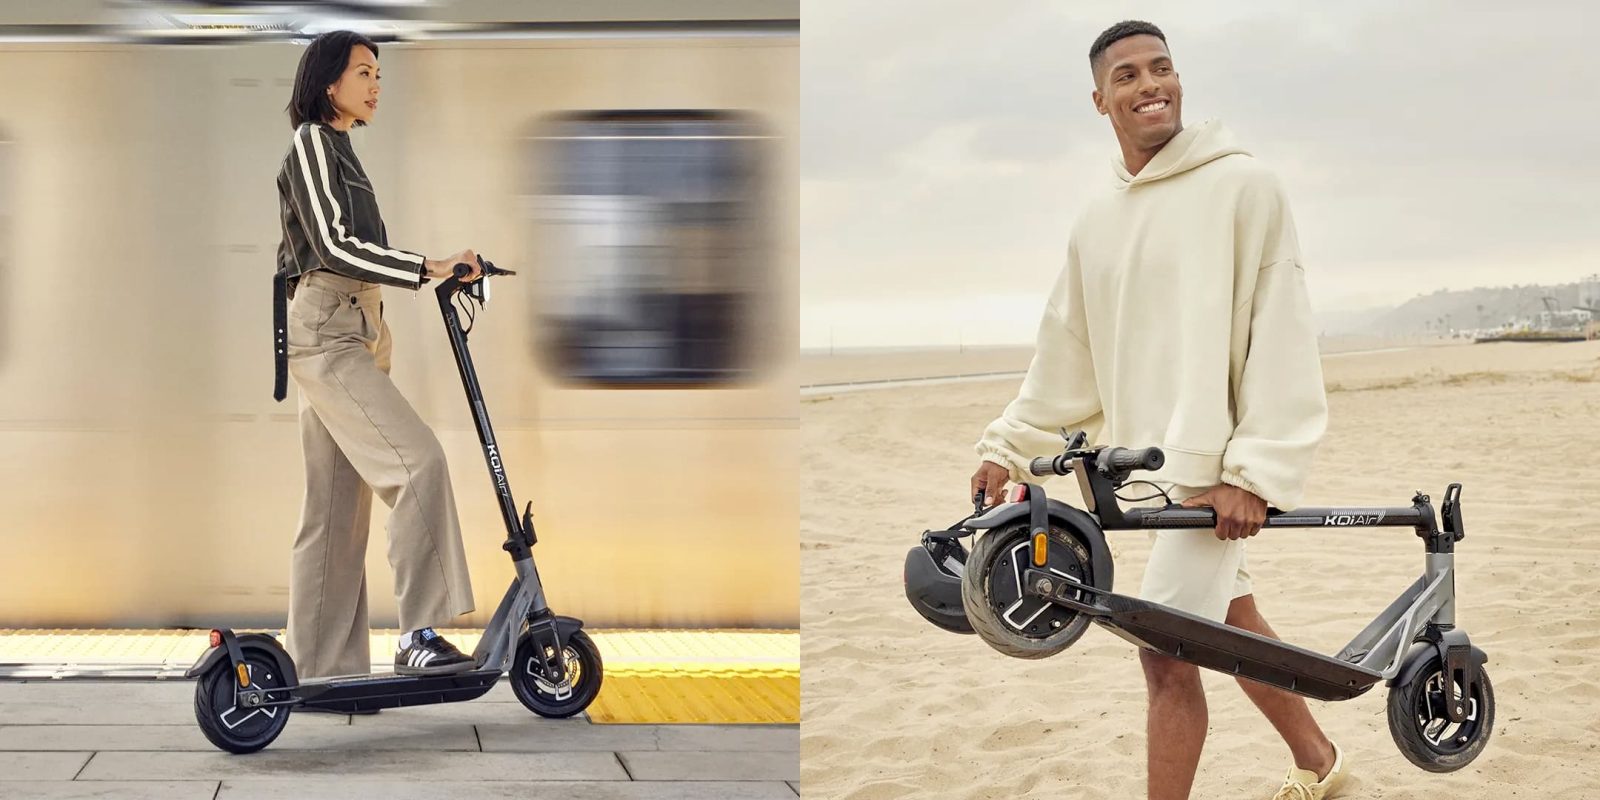 Lightweight NIU KQi Air carbon fiber electric scooters unveiled